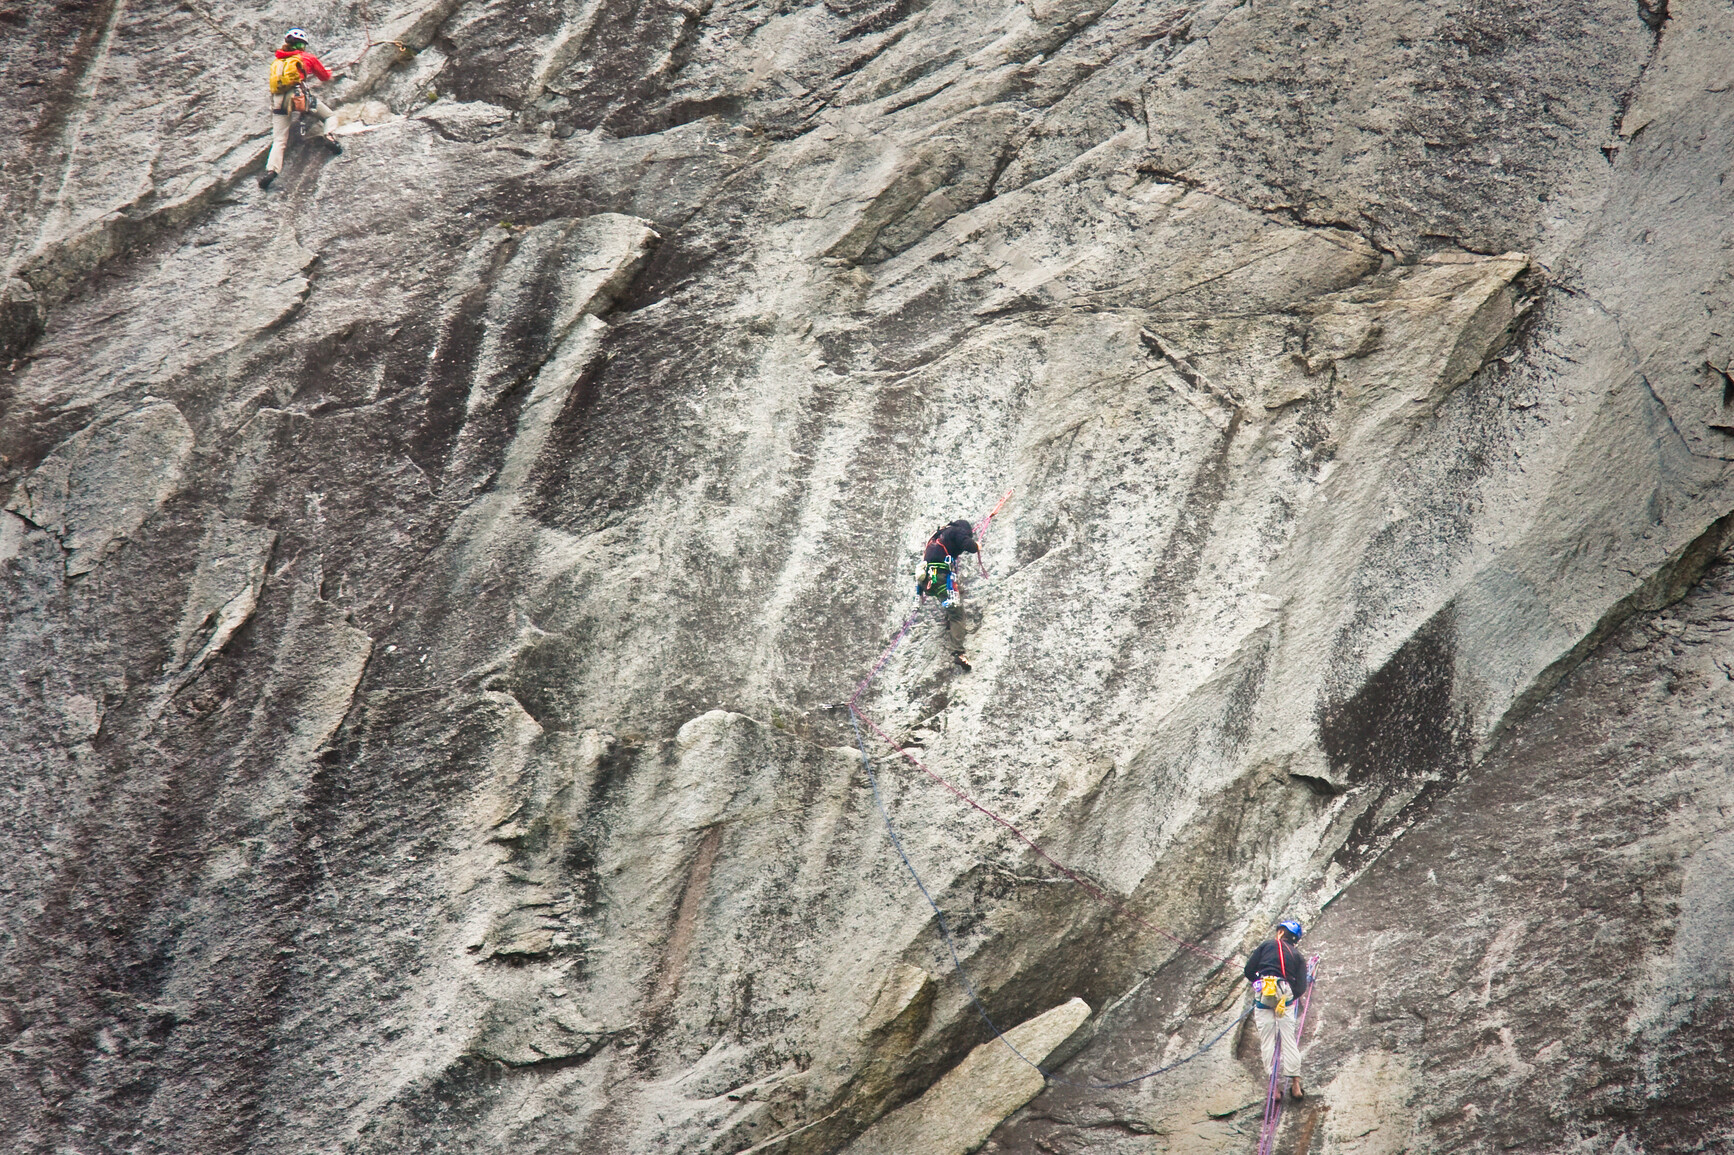 Climbers scaling the face of mountain. Stawamus Chief Park.